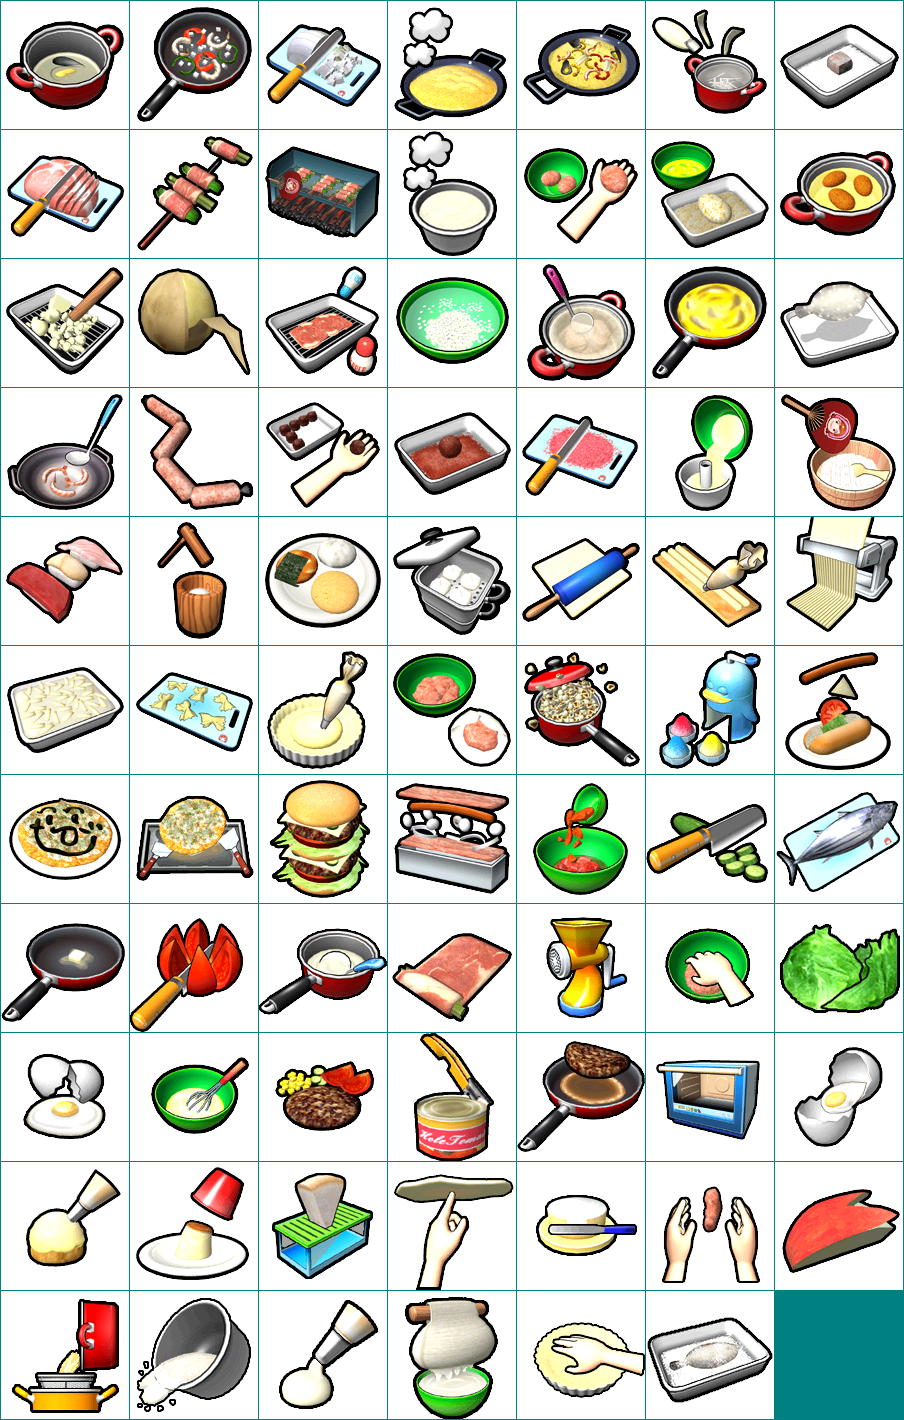 cook clipart food cooking